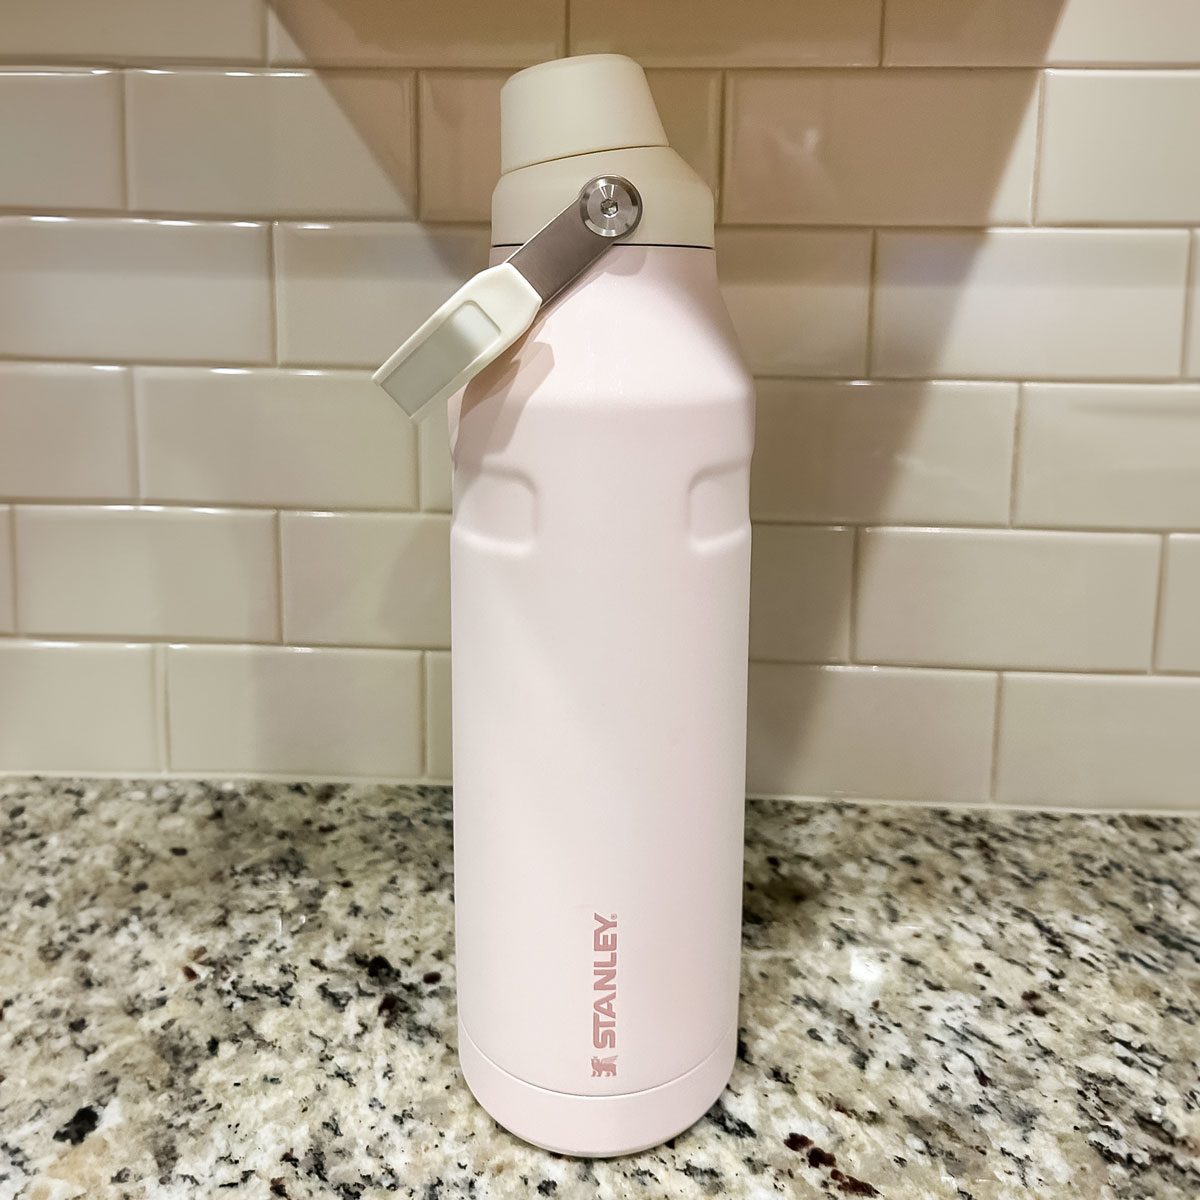 <h3>Stanley Iceflow with Fast Flow Lid</h3> <p class="elementToProof">Our Senior Editor Caroline Lubinsky tested the <a href="https://www.stanley1913.com/products/the-iceflow-aerolight-water-bottle-fast-flow-24-oz" rel="noopener">Stanley IceFlow <span>Bottle</span></a> in the 55-ounce size. This <span>bottle</span> has a helpful carrying handle, which the cap clips onto when drinking <span>water</span>. Despite the lightweight material—spun steel is about 30% more lightweight than the usual 18/8 stainless steel—double-wall insulation keeps drinks iced for up to two days.</p> <p class="elementToProof">"I own a Yeti in the same size, and think the Stanley is decidedly lighter (which is a big plus to me)," says Lubinsky. "Other things I like about this <span>bottle</span> include the double-walled construction, which helps the <a href="https://www.familyhandyman.com/list/countertop-ice-makers/">ice</a> stay cold for literal days, and the large variety of color options available."</p> <p><strong>Size(s):</strong> 16 oz., 24 oz., 36 oz., 50 oz., 96 oz. <strong>| Lid(s): </strong>Fast Flow Lid, <a href="https://www.stanley1913.com/products/iceflow-replacement-lid-17-oz-22-oz" rel="noopener">Ice Flow Flip Straw Lid</a> (Sold Separately)<strong> | Dishwasher Safe: </strong>Yes<strong> | Material:</strong> Spun Stainless Steel<strong> | Hot Liquids: </strong>No</p> <p><strong>Pros</strong></p> <ul> <li> <div class="elementToProof">Available in four sizes</div> </li> <li> <div class="elementToProof">Lots of color options</div> </li> <li> <div class="elementToProof">Leakproof</div> </li> <li> <div class="elementToProof">Dishwasher safe</div> </li> <li> <div class="elementToProof">Lifetime warranty</div> </li> <li> <div class="elementToProof">Lightweight for the size</div> </li> <li> <div class="elementToProof">Keeps ice cold for days</div> </li> </ul> <p><strong>Cons</strong></p> <ul> <li>Dents fairly easily</li> <li>55-ounce <span>bottle</span> doesn't fit in cupholders</li> </ul> <p class="listicle-page__cta-button-shop"><a class="shop-btn" href="https://www.stanley1913.com/products/the-iceflow-aerolight-water-bottle-fast-flow-24-oz">Shop on Stanley</a></p> <p class="listicle-page__cta-button-shop"><a class="shop-btn" href="https://www.amazon.com/Stanley-IceFlowTM-Fast-Flow-Bottle/dp/B0CFP3S5R4">Shop on Amazon</a></p> <h2>What<strong> to Consider Before Buying a Reusable Water Bottle</strong></h2> <p>There’s a lot to consider when hunting for the best water bottle. Unlike <a href="https://www.familyhandyman.com/list/best-tumbler/">travel tumblers</a>, traditional water bottles typically aren’t meant to carry hot drinks like coffee. Because of that distinction, it’s advised to stick to bottles rated for both hot and cold beverages if you plan on alternating.</p> <p>Size and lid type are also important aspects of a water bottle. Those who take to the trail for jogs or hiking may find that while travel tumblers are easy to hold, they’re often heavy and don’t usually offer leakproof lids. This is especially important for those who plan on storing their bottle in a hiking bag or backpack. If this water bottle is a <a href="https://www.familyhandyman.com/list/gifts-for-hikers/">gift for a hiker</a>, look for an option that doesn’t have a push-in top or straw.</p> <h2>How We Tested Water Bottles</h2> <p>At <i>Family Handyman</i>, our editors don’t just sit at a desk—we’re always on the move. Our staff has tested countless bottles over the last few years, from hydrating during trail walks to sips between floor sanding. All said we take our drinks seriously when it comes to staying hydrated.</p> <p>We considered the following while testing water bottles for inclusion: the materials, weight, ease of use, aesthetics and how long drinks stay cold in various temperatures and conditions. We’ve even left our water bottles in the car for an entire day to see whether the ice inside has melted. Spoiler: Our best overall came out on top in this regard!</p> <h2>Why You Should Trust Us</h2> <p><span><a class="fui-Link ___1rxvrpe f2hkw1w f3rmtva f1ewtqcl fyind8e f1k6fduh f1w7gpdv fk6fouc fjoy568 figsok6 f1hu3pq6 f11qmguv f19f4twv f1tyq0we f1g0x7ka fhxju0i f1qch9an f1cnd47f fqv5qza f1vmzxwi f1o700av f13mvf36 f1cmlufx f9n3di6 f1ids18y f1tx3yz7 f1deo86v f1eh06m1 f1iescvh fhgqx19 f1olyrje f1p93eir f1nev41a f1h8hb77 f1lqvz6u f10aw75t fsle3fq f17ae5zn" title="https://www.familyhandyman.com/author/emily-way/" href="https://www.familyhandyman.com/author/emily-way/" rel="noreferrer noopener">Emily Way</a> is an Associate Shopping Editor for <i>Family Handyman</i> with experience researching products and recommending the best designs to consumers. She researched and updated this piece. Family Handyman's in-house editorial staff and experts tested and researched every water bottle on this list.</span></p> <p>Way interviewed Dr. Kevin Dwyer of <a href="https://doctors.hackensackmeridianhealth.org/provider/Kevin+Thomas+Dwyer/2470331" rel="noopener">Riverview Medical Center</a>. He received his medical degree from Philadelphia College of Osteopathic Medicine and oversees the Emergency Department. Given his proximity to the Shore, Dr. Dwyer sees dehydration often and is an expert in the risks associated with poor hydration.</p> <h2>FAQ</h2> <h3>How much water should I drink in a day?</h3> <p>“The amount of water you need depends on various factors, including your health, activity levels, and climate," says Dr. Dwyer. "A general guideline is about 3.7 liters for men and 2.7 liters for women per day from all beverages and foods. But this varies, and it’s important to listen to your body and drink when you’re thirsty.”</p> <h3>What is the healthiest water to drink?</h3> <p>“Clinically speaking, the healthiest water is one that maintains a balance of essential minerals while being devoid of harmful contaminants," says Dr. Dwyer. He notes that tap water in most developed countries meets these criteria and is subject to rigorous testing. Whether tap, filtered, or bottled, it should meet safety standards.</p> <p>"Some prefer mineral water for its added nutrients. Flavored water is a fine alternative, but be aware of beverages that are high in sugar as they are associated with obesity and diabetes. Some health experts tout alkaline water for potential health benefits, but more research is needed before this should be recommended over plain water. Ultimately, the best option is what has been available to humans since the beginning of time, just good old plain water.”</p>